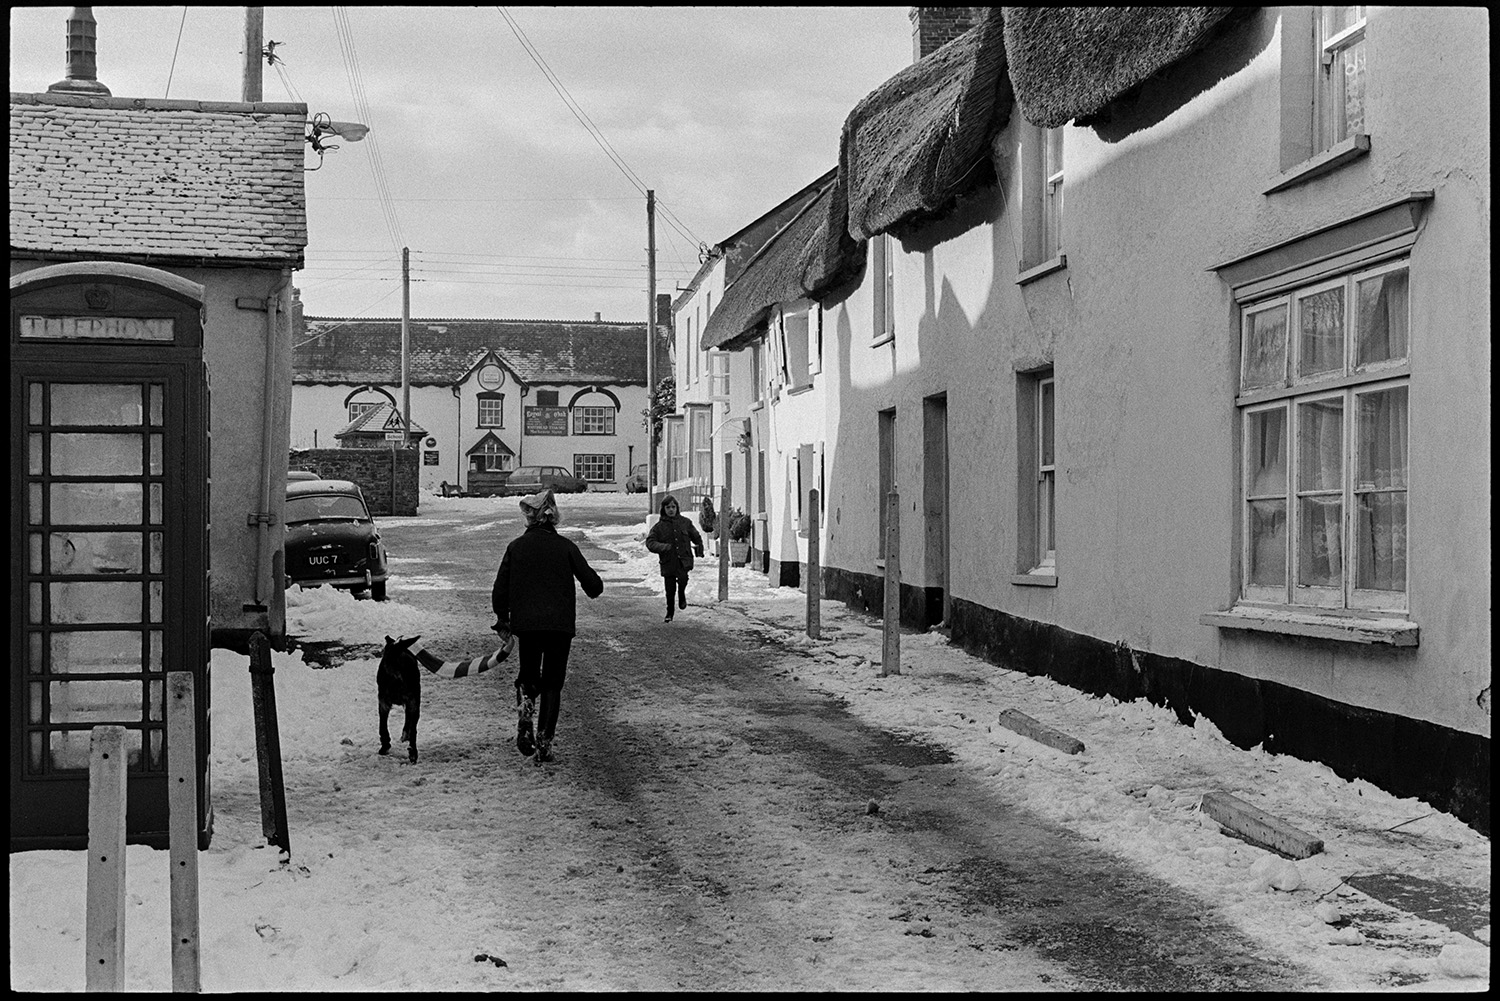 Snow, people shopping, chatting in snowy village, house with unusual roof. 
[People walking along Fore Street in Dolton, past thatched cottages and a telephone box. The street is covered with snow. The Royal Oak pub can be seen in the background.]